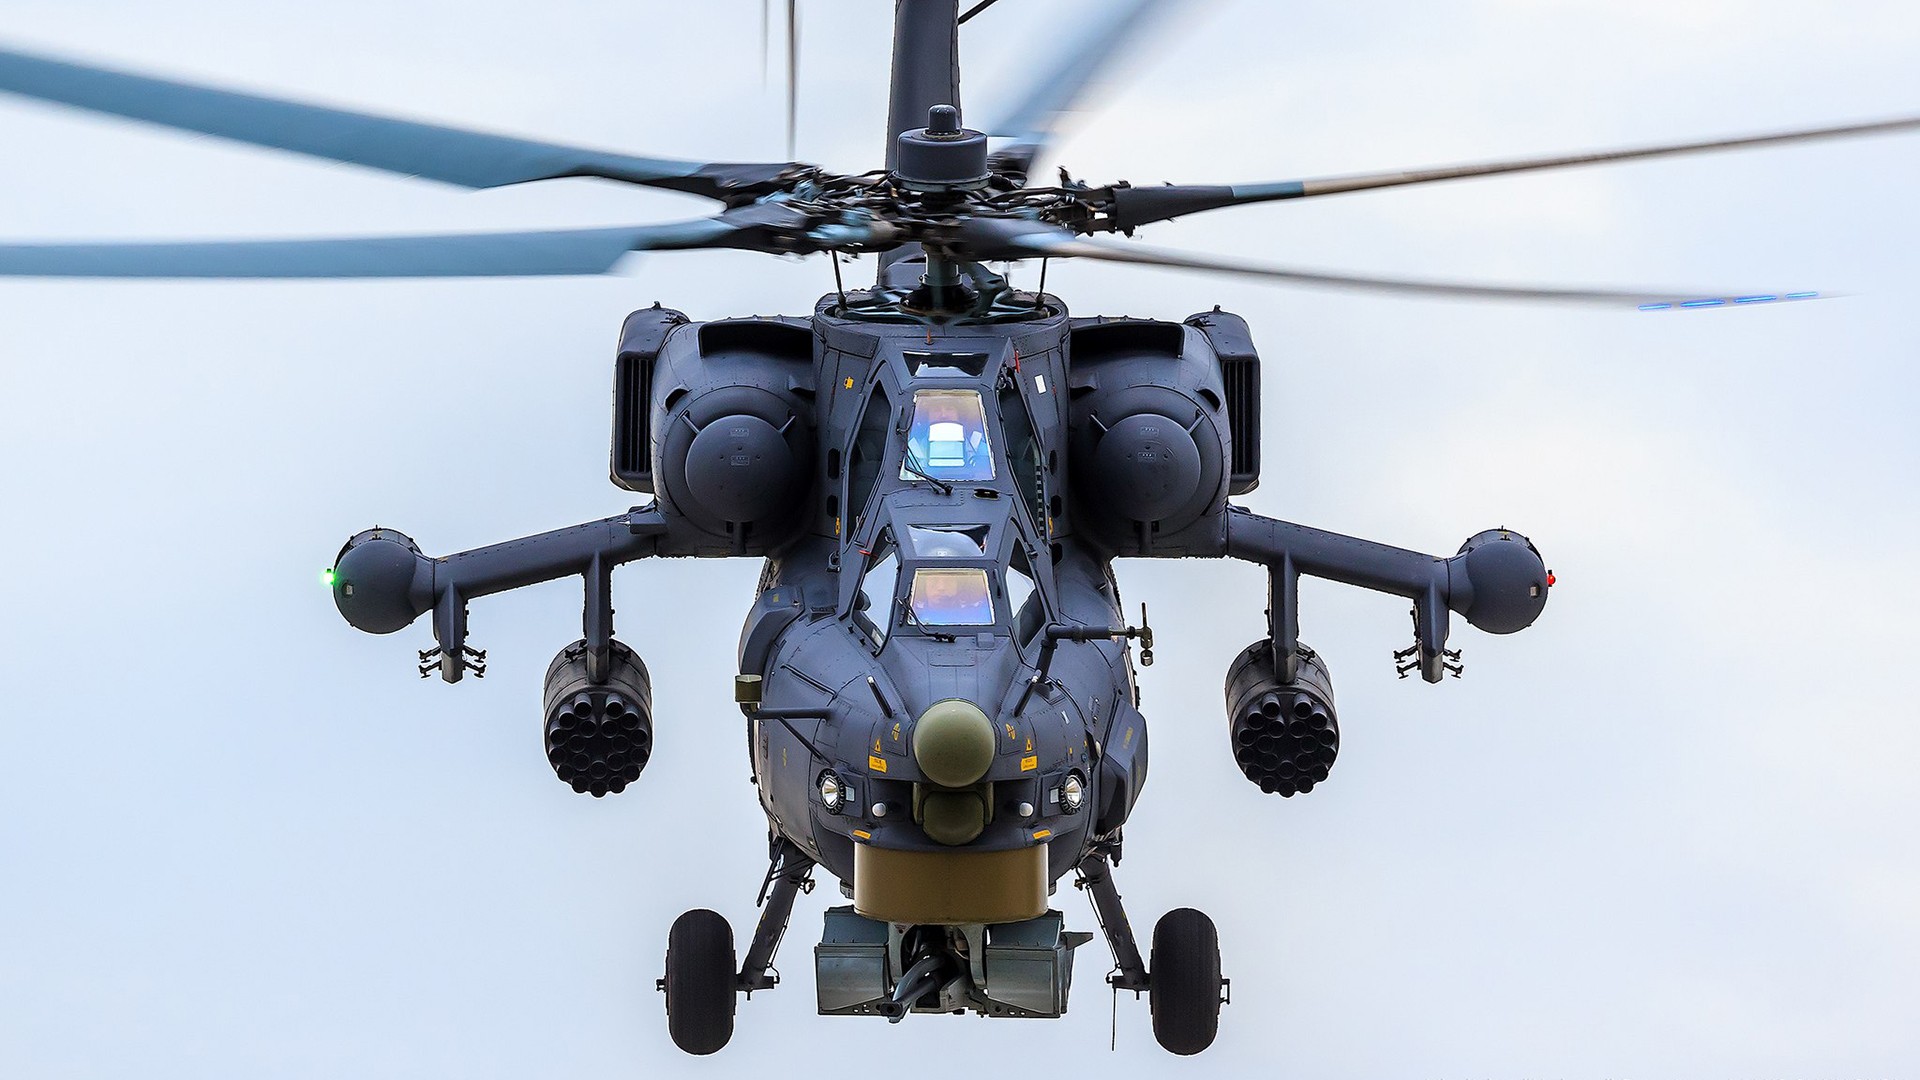 General 1920x1080 Berkuts helicopters Mil Mi-28 military vehicle military vehicle military aircraft attack helicopters Russian/Soviet aircraft